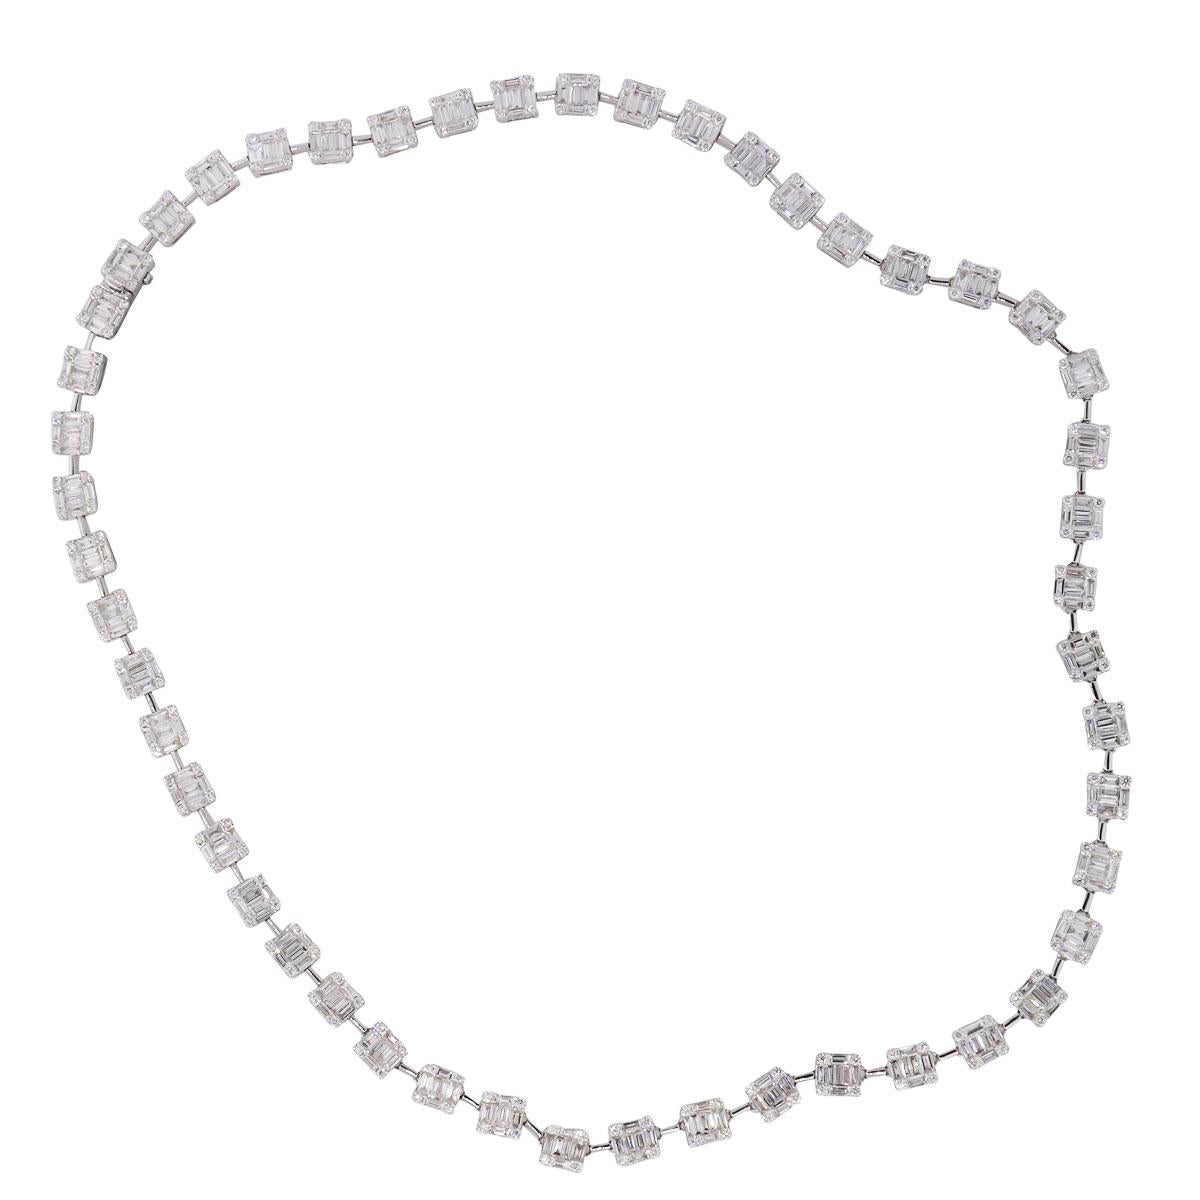 Material: 18k white gold
Diamond Details: Approximately 1.78ctw of round brilliant diamonds (200 stones). Approximately 9.08ctw of baguette shape diamonds (319 stones). Diamonds are G/H in color and VS in clarity
Necklace Measurements: Necklace is